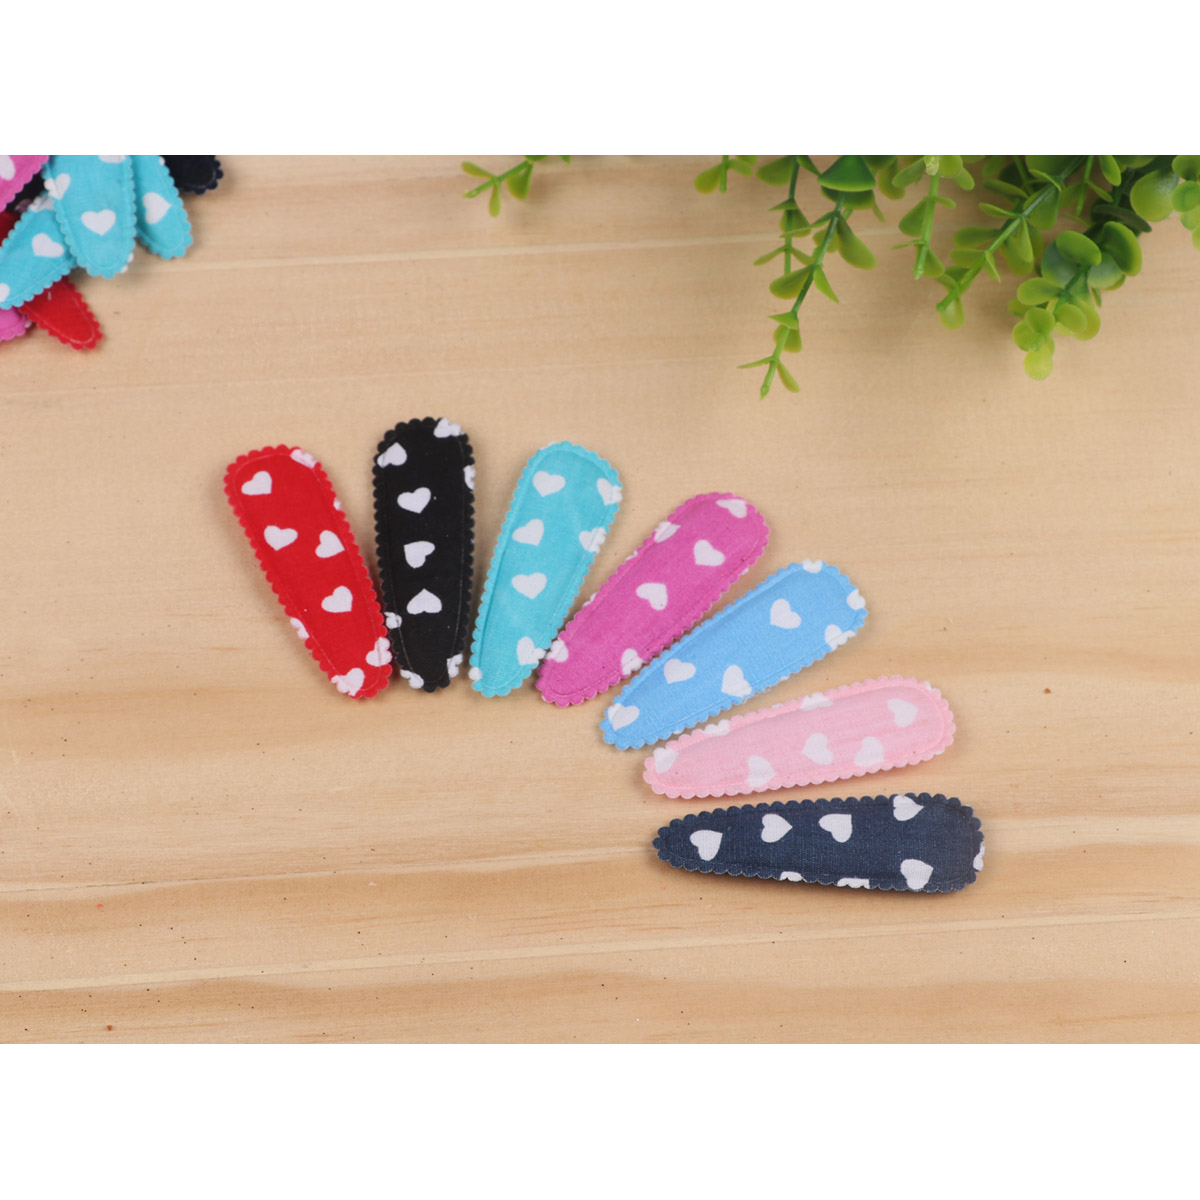 70 Padded Heart 55mm Cute Hair Clip Covers-7 colors